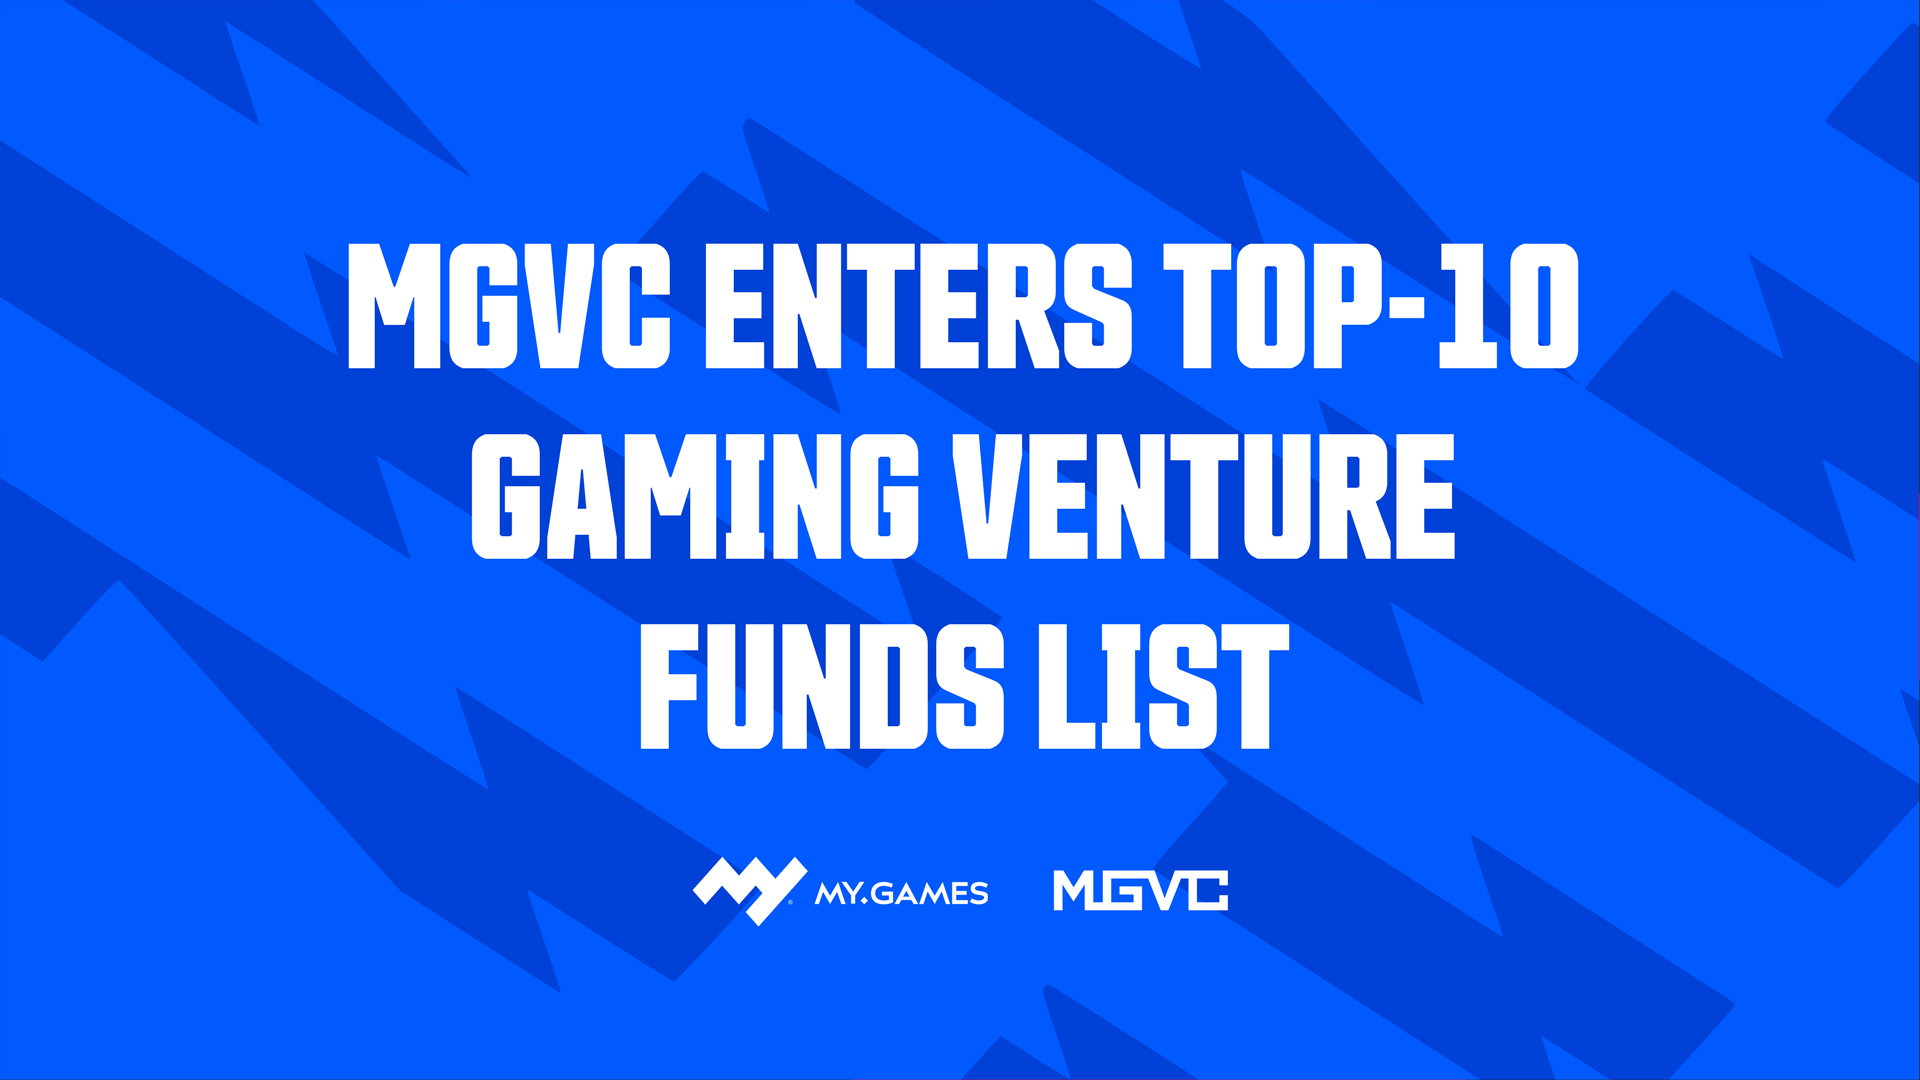 MGVC Opens 2023 Investment Cycle Hitting 57th Deal by Investing  Into Two European Studios